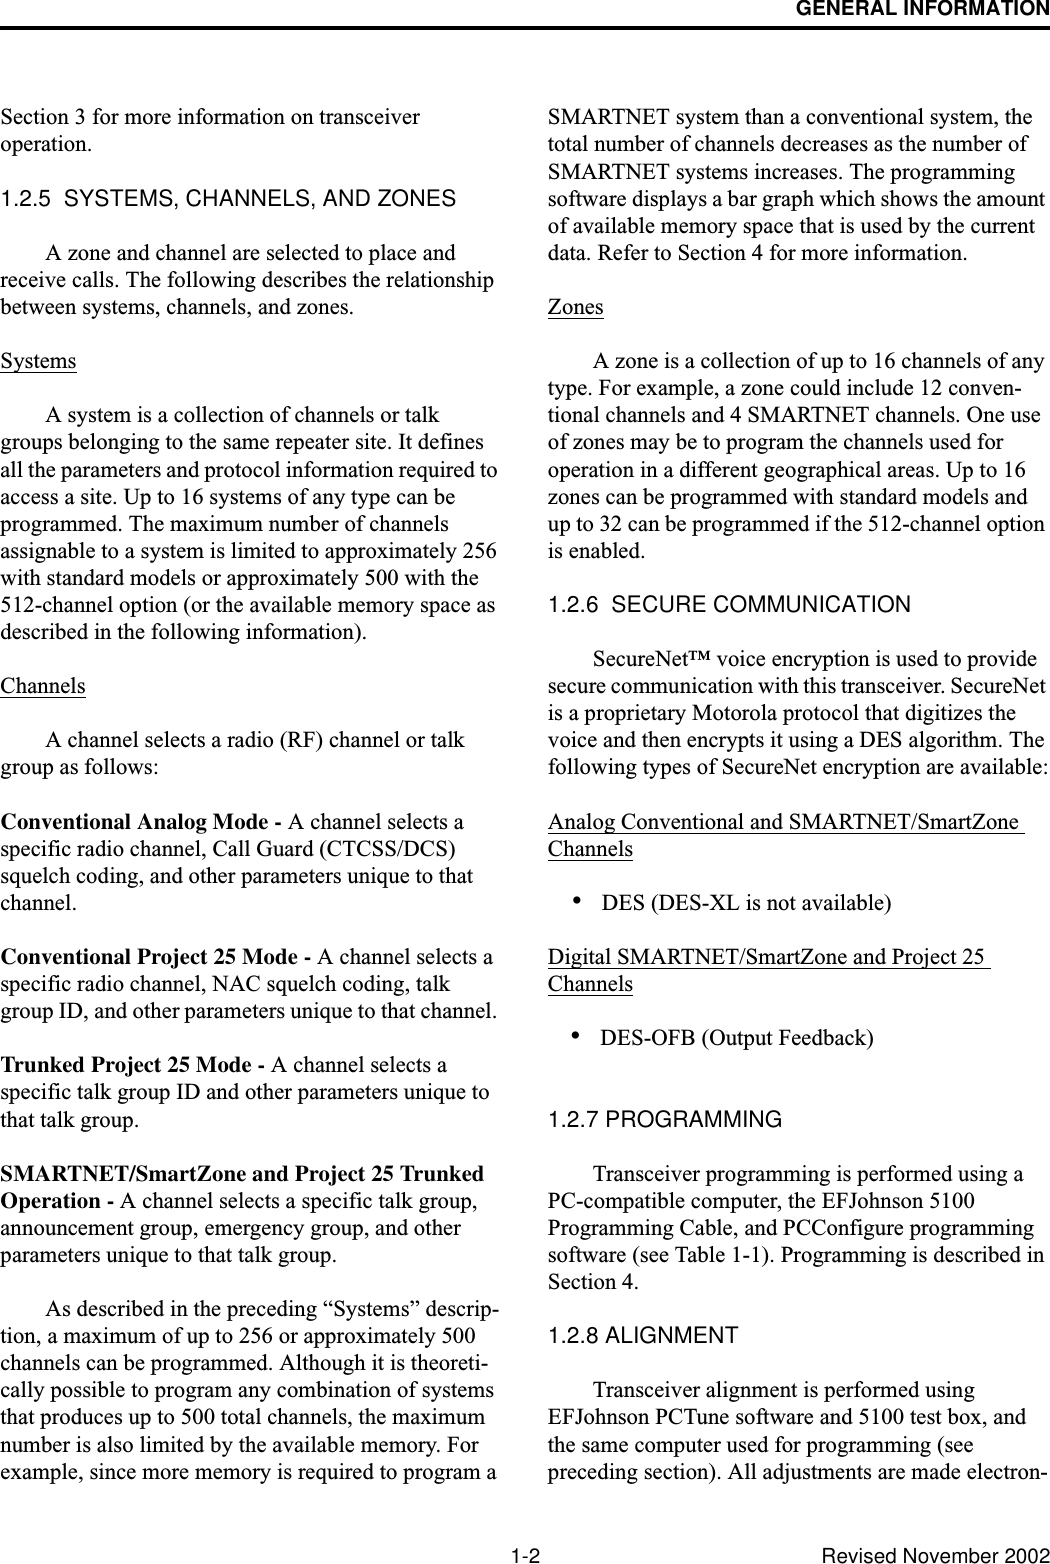 GENERAL INFORMATION1-2 Revised November 2002Section 3 for more information on transceiver operation.1.2.5  SYSTEMS, CHANNELS, AND ZONESA zone and channel are selected to place and receive calls. The following describes the relationship between systems, channels, and zones.SystemsA system is a collection of channels or talk groups belonging to the same repeater site. It defines all the parameters and protocol information required to access a site. Up to 16 systems of any type can be programmed. The maximum number of channels assignable to a system is limited to approximately 256 with standard models or approximately 500 with the 512-channel option (or the available memory space as described in the following information).ChannelsA channel selects a radio (RF) channel or talk group as follows:Conventional Analog Mode - A channel selects a specific radio channel, Call Guard (CTCSS/DCS) squelch coding, and other parameters unique to that channel.Conventional Project 25 Mode - A channel selects a specific radio channel, NAC squelch coding, talk group ID, and other parameters unique to that channel. Trunked Project 25 Mode - A channel selects a specific talk group ID and other parameters unique to that talk group.SMARTNET/SmartZone and Project 25 Trunked Operation - A channel selects a specific talk group, announcement group, emergency group, and other parameters unique to that talk group.As described in the preceding “Systems” descrip-tion, a maximum of up to 256 or approximately 500 channels can be programmed. Although it is theoreti-cally possible to program any combination of systems that produces up to 500 total channels, the maximum number is also limited by the available memory. For example, since more memory is required to program a SMARTNET system than a conventional system, the total number of channels decreases as the number of SMARTNET systems increases. The programming software displays a bar graph which shows the amount of available memory space that is used by the current data. Refer to Section 4 for more information. ZonesA zone is a collection of up to 16 channels of any type. For example, a zone could include 12 conven-tional channels and 4 SMARTNET channels. One use of zones may be to program the channels used for operation in a different geographical areas. Up to 16 zones can be programmed with standard models and up to 32 can be programmed if the 512-channel option is enabled. 1.2.6  SECURE COMMUNICATIONSecureNet™ voice encryption is used to provide secure communication with this transceiver. SecureNet is a proprietary Motorola protocol that digitizes the voice and then encrypts it using a DES algorithm. The following types of SecureNet encryption are available:Analog Conventional and SMARTNET/SmartZone Channels•DES (DES-XL is not available)Digital SMARTNET/SmartZone and Project 25 Channels•DES-OFB (Output Feedback)1.2.7 PROGRAMMINGTransceiver programming is performed using a PC-compatible computer, the EFJohnson 5100 Programming Cable, and PCConfigure programming software (see Table 1-1). Programming is described in Section 4.1.2.8 ALIGNMENTTransceiver alignment is performed using EFJohnson PCTune software and 5100 test box, and the same computer used for programming (see preceding section). All adjustments are made electron-